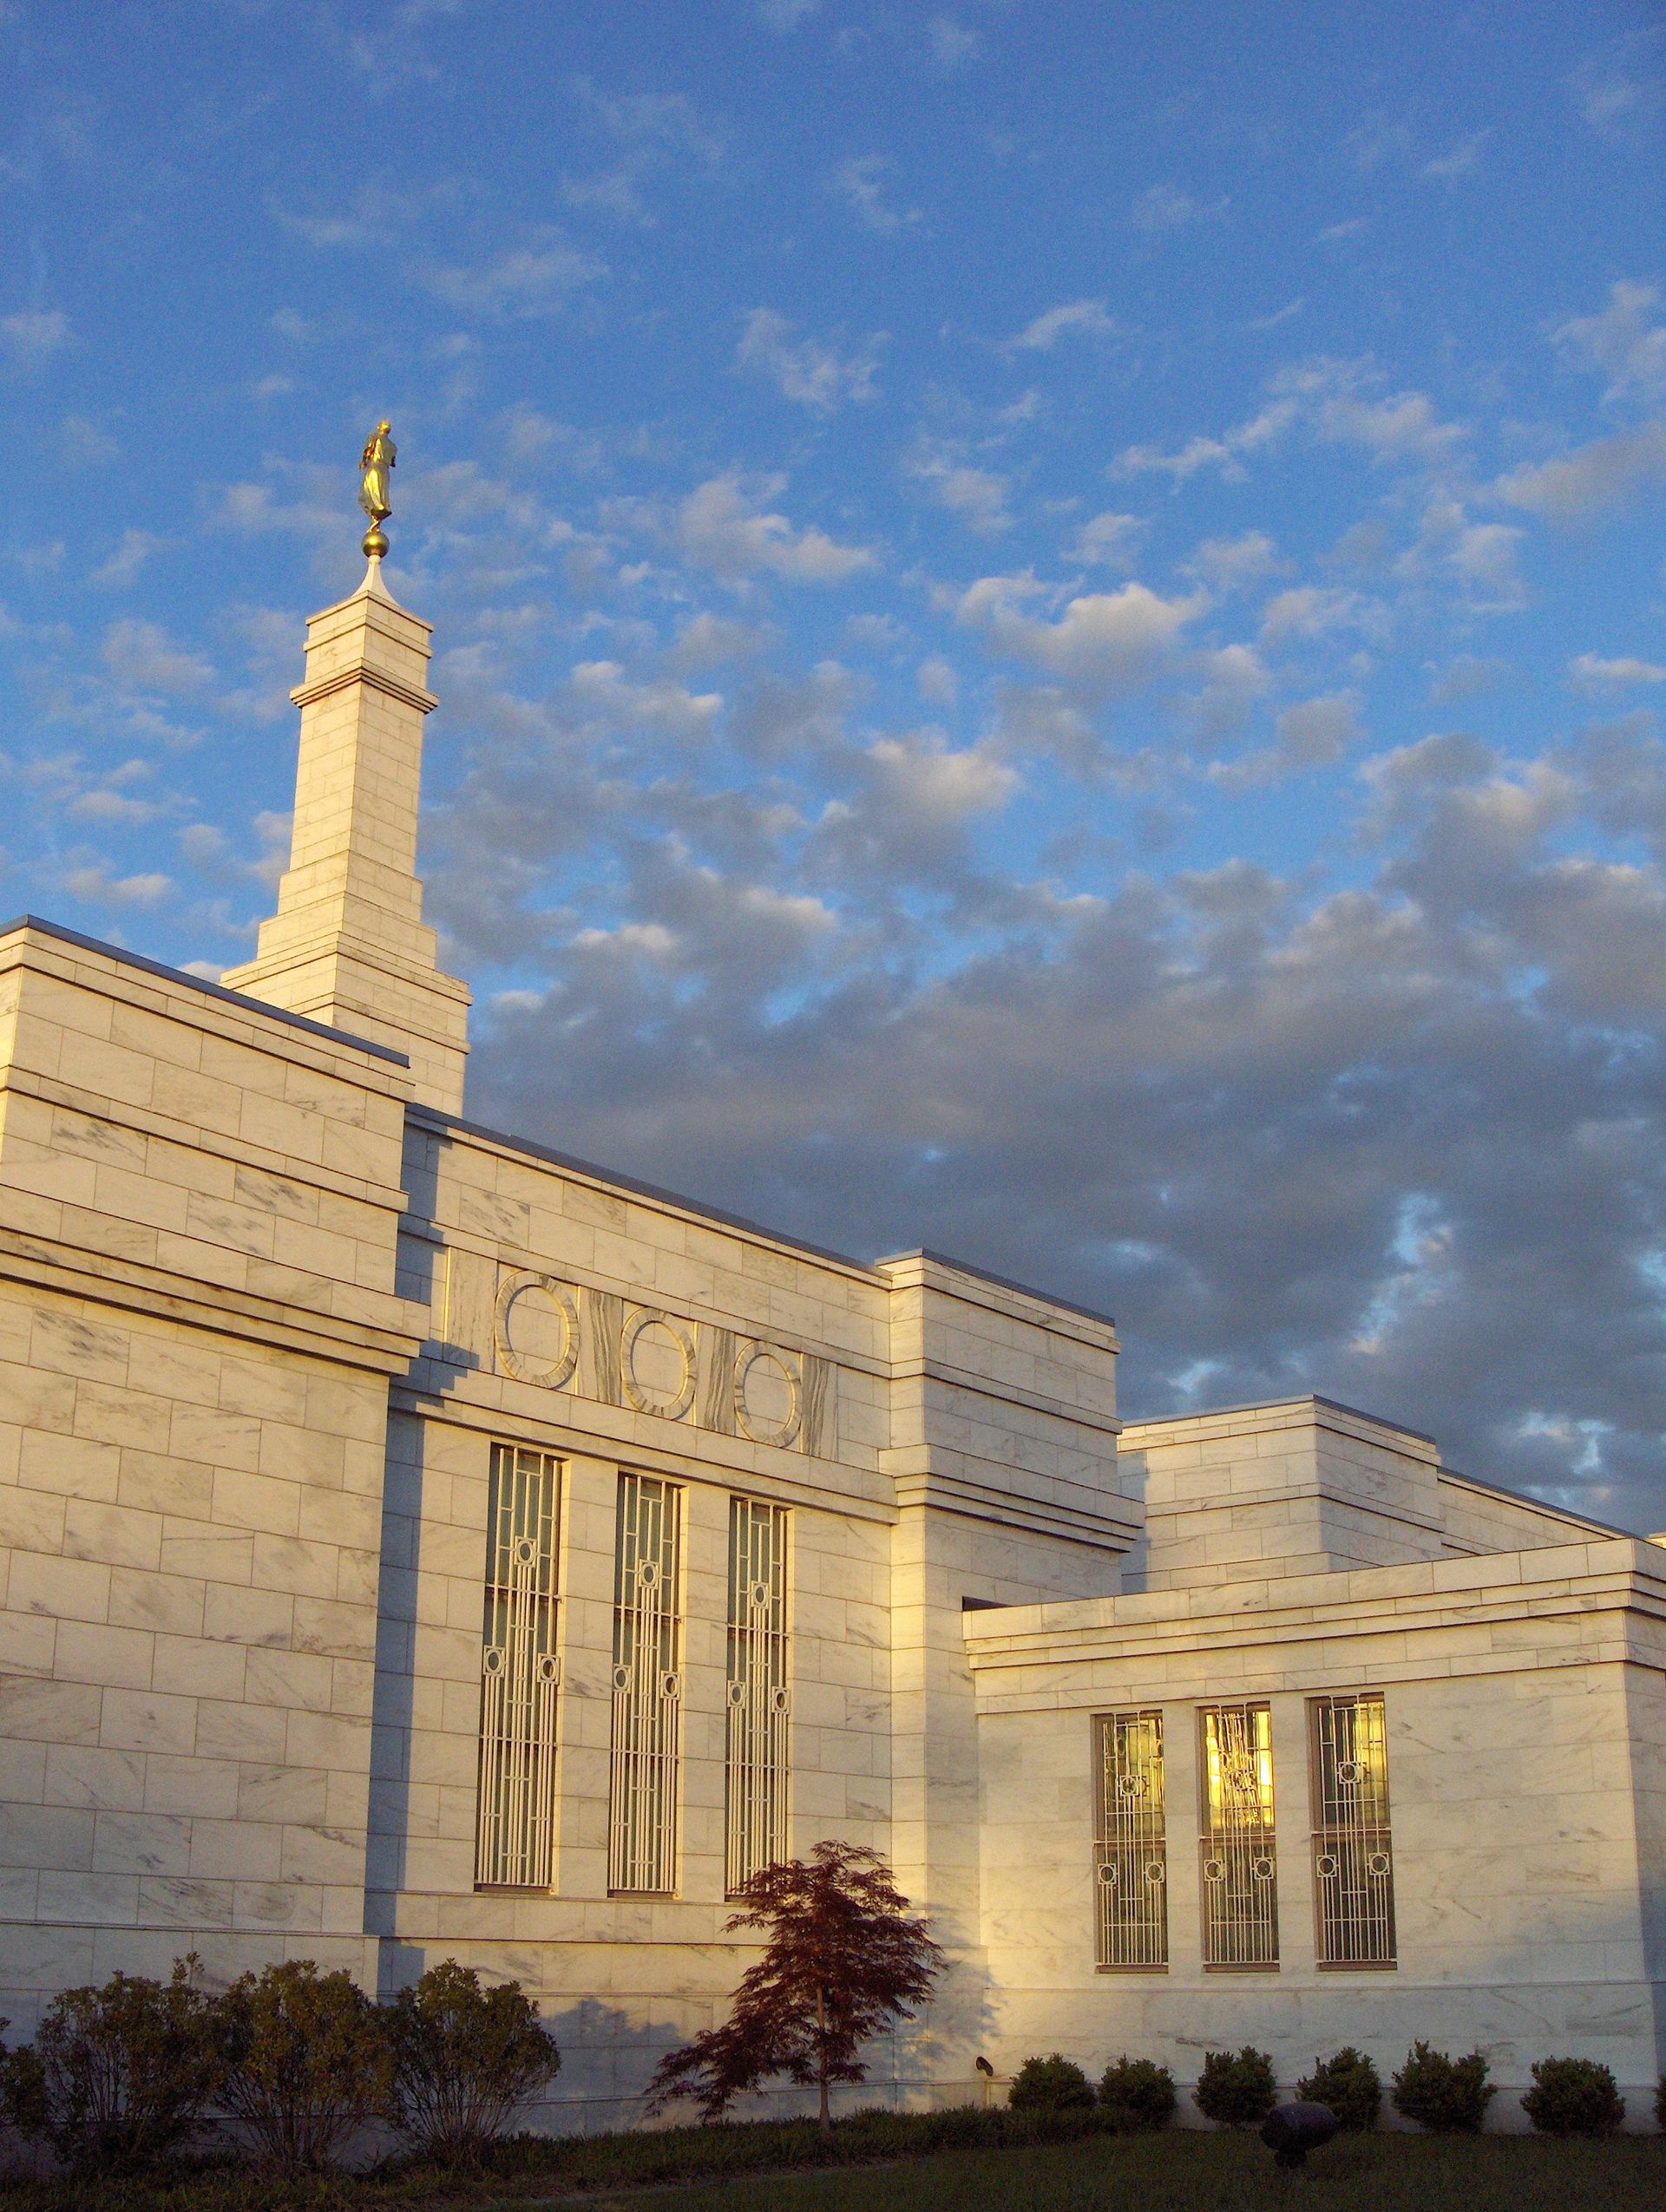 A view of the Columbus Ohio Temple in the evening.